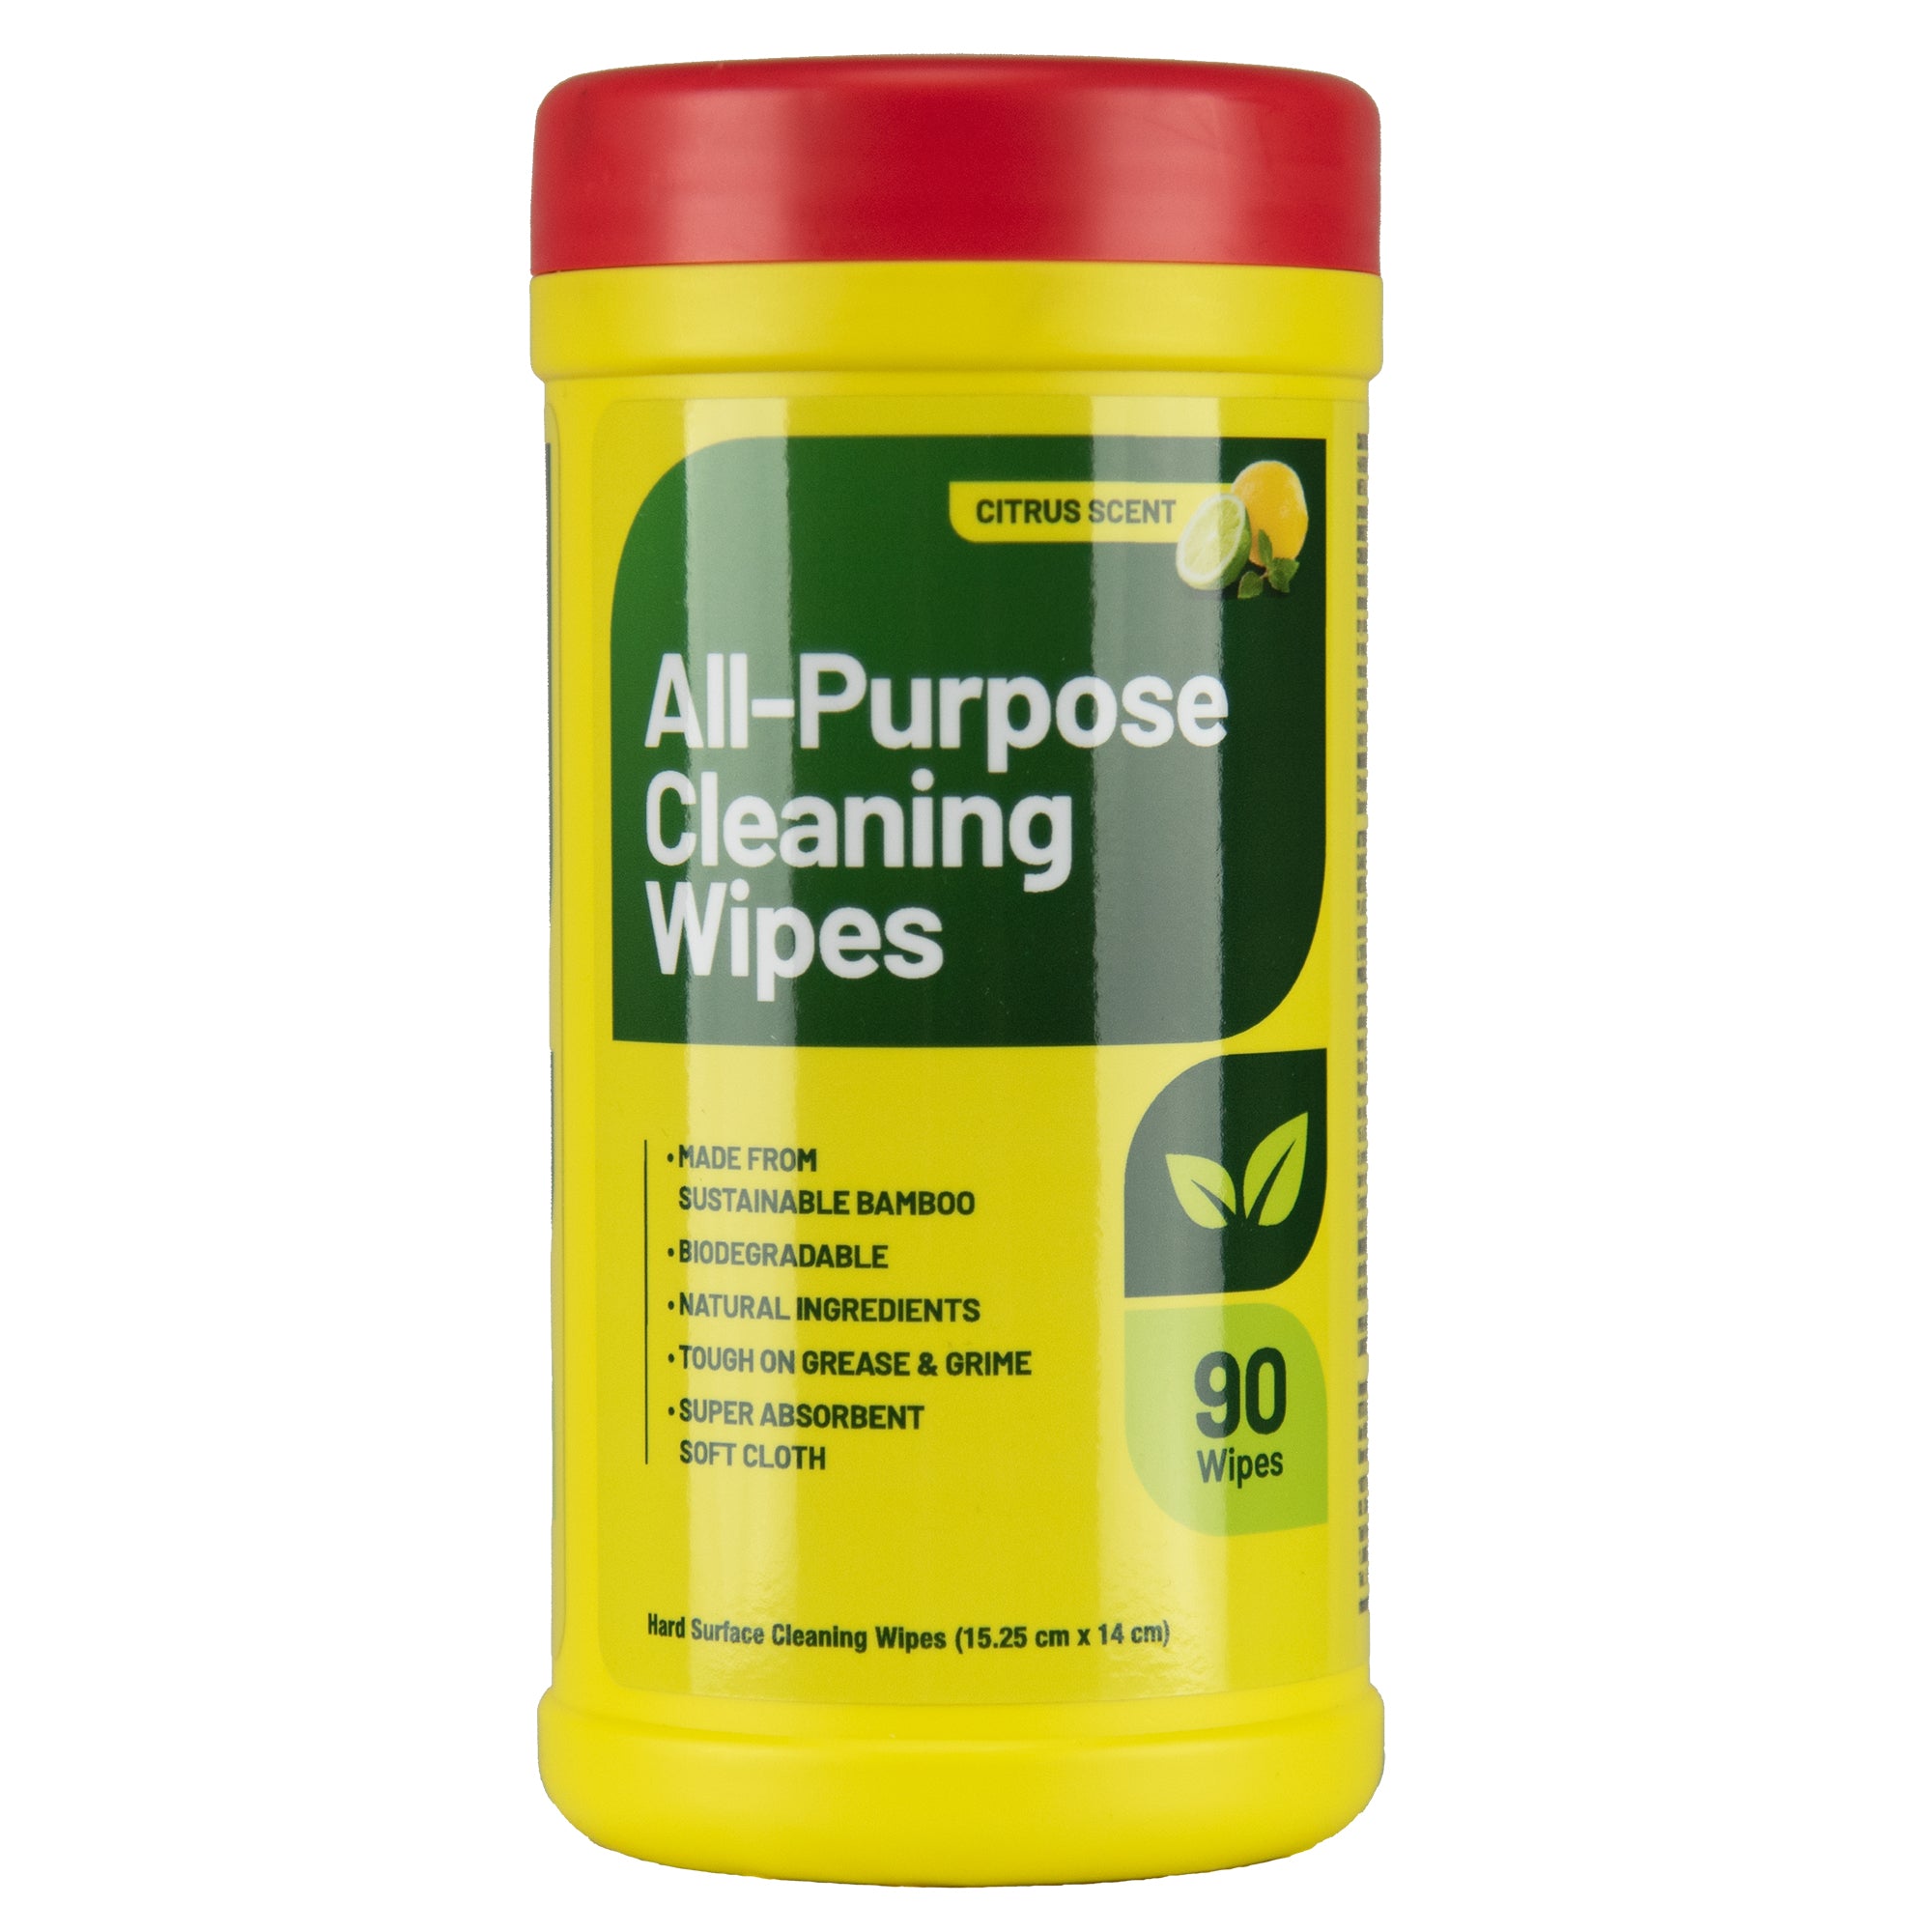 All-Purpose Cleaning Wipes, canister of 90 wipes on a white background